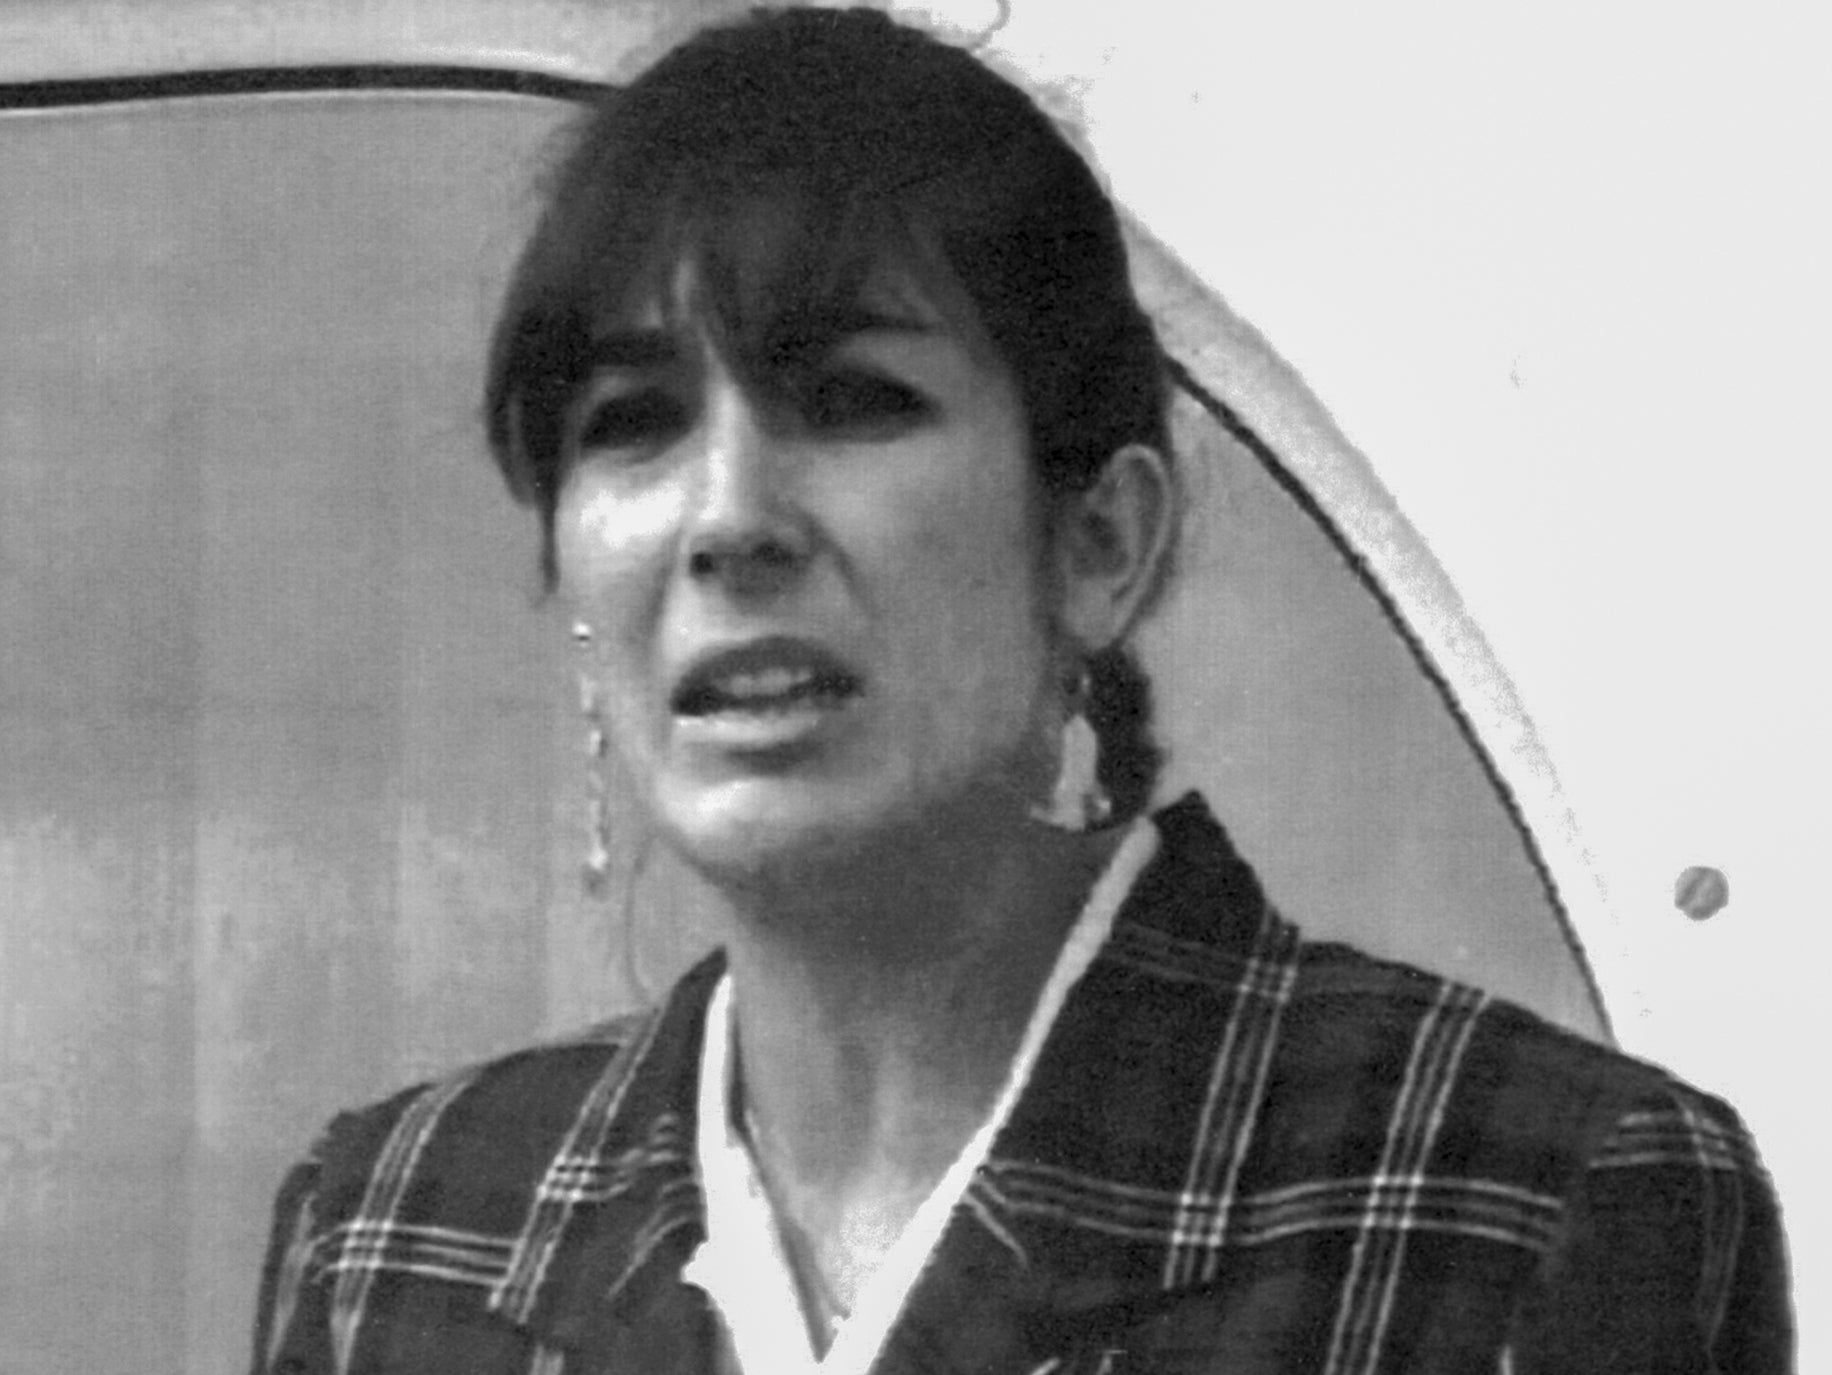 Maxwell reading a press statement on her father’s death in Spain in November 1991